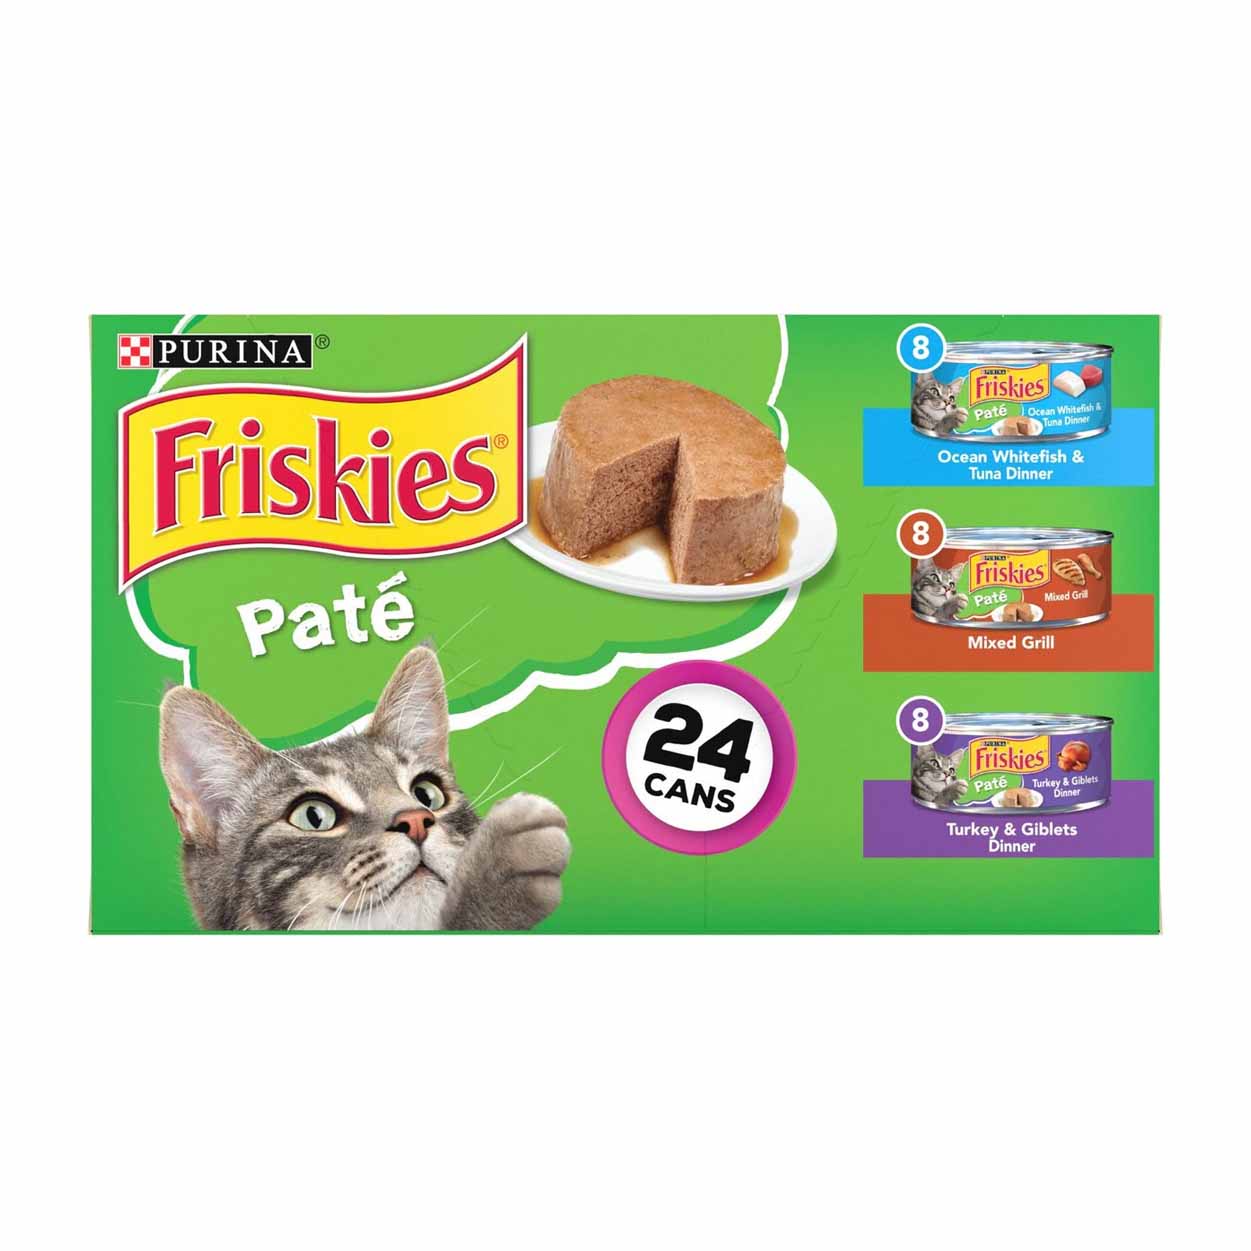 Friskies Classic Pate Variety Pack Canned Cat Food in green packet